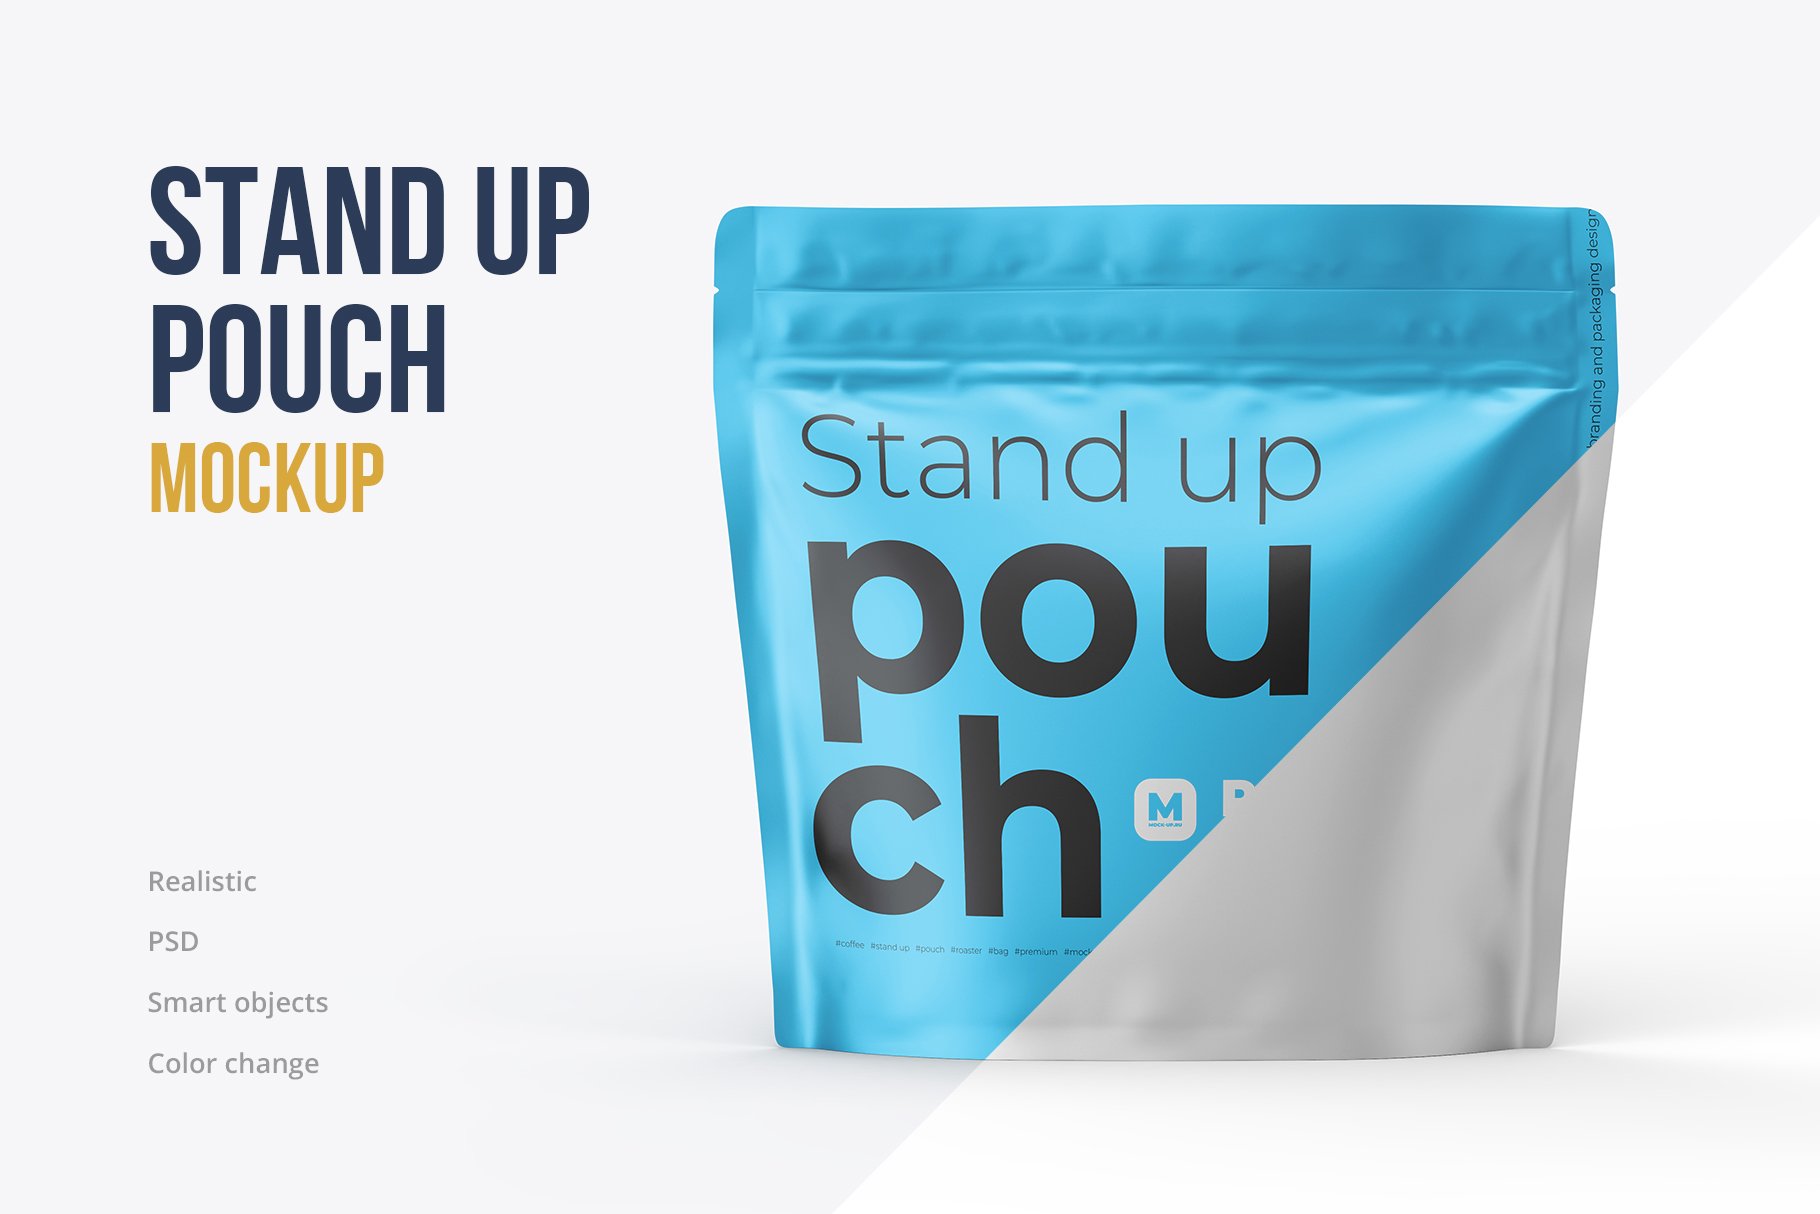 Stand-up Pouch Mockup (square) cover image.